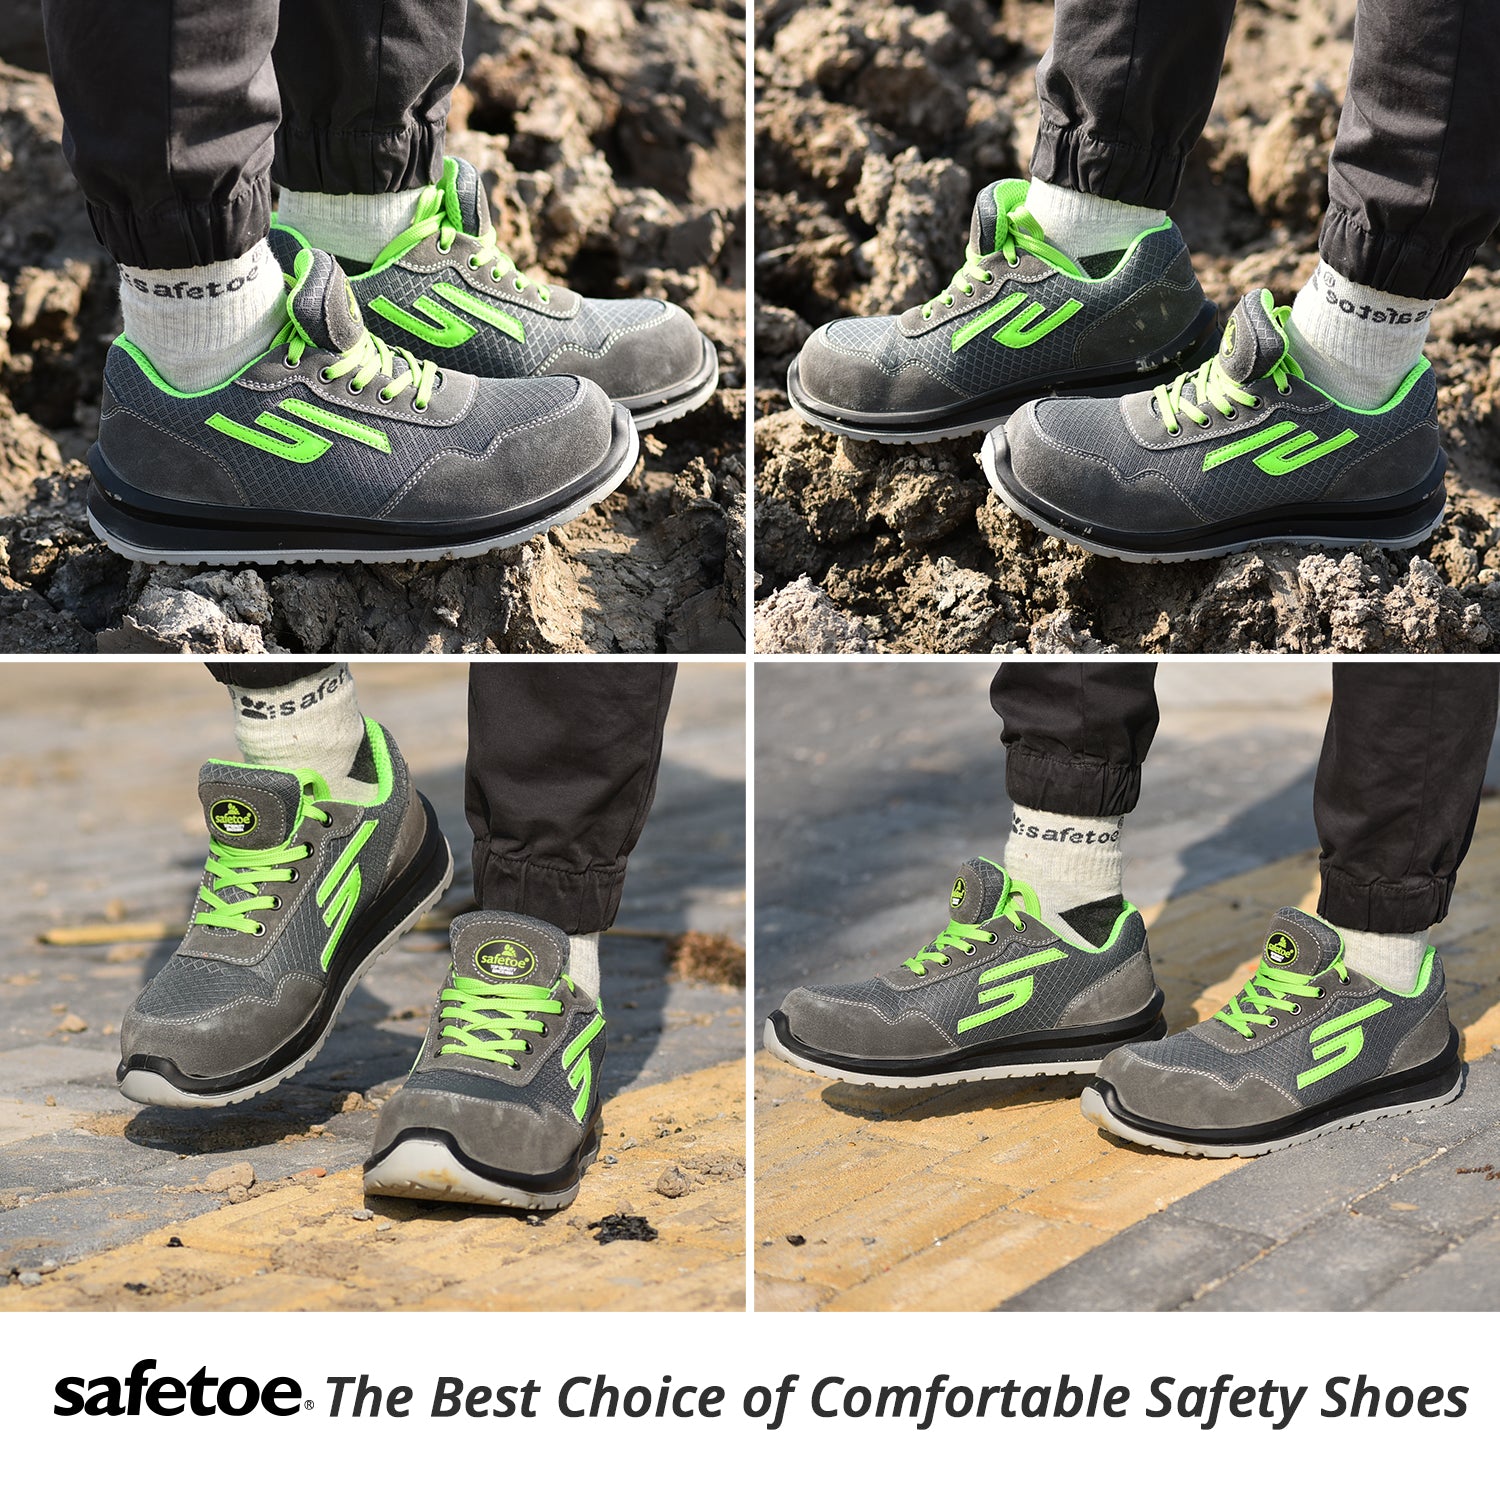 Safety Footwear is Not a One-Size-Fits-All Approach